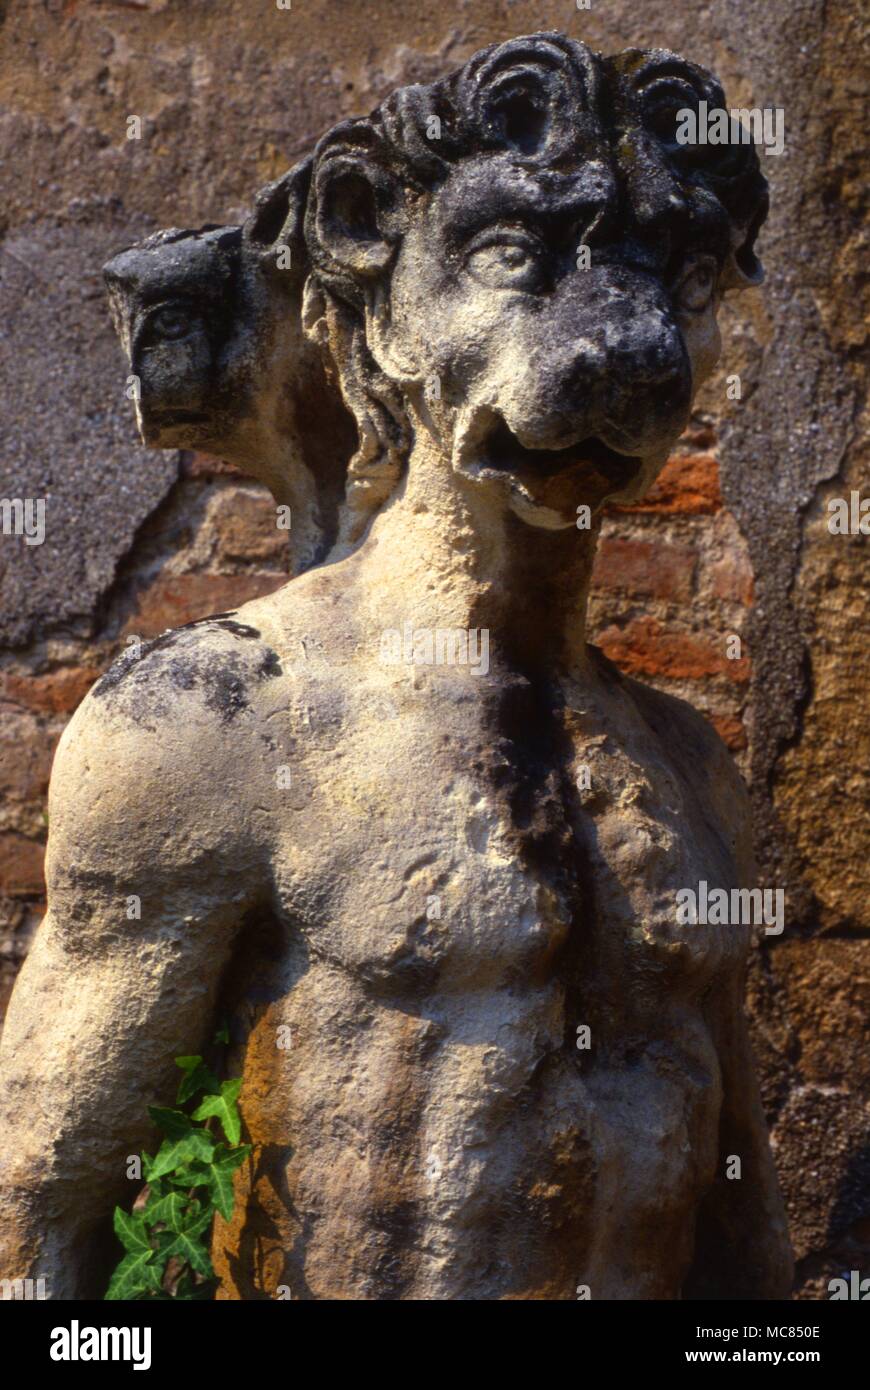 Detail of full-length humanoid with a demonic, or monstrous, head, in the gardens of the Roman Theatre a t Vincenza. Stock Photo